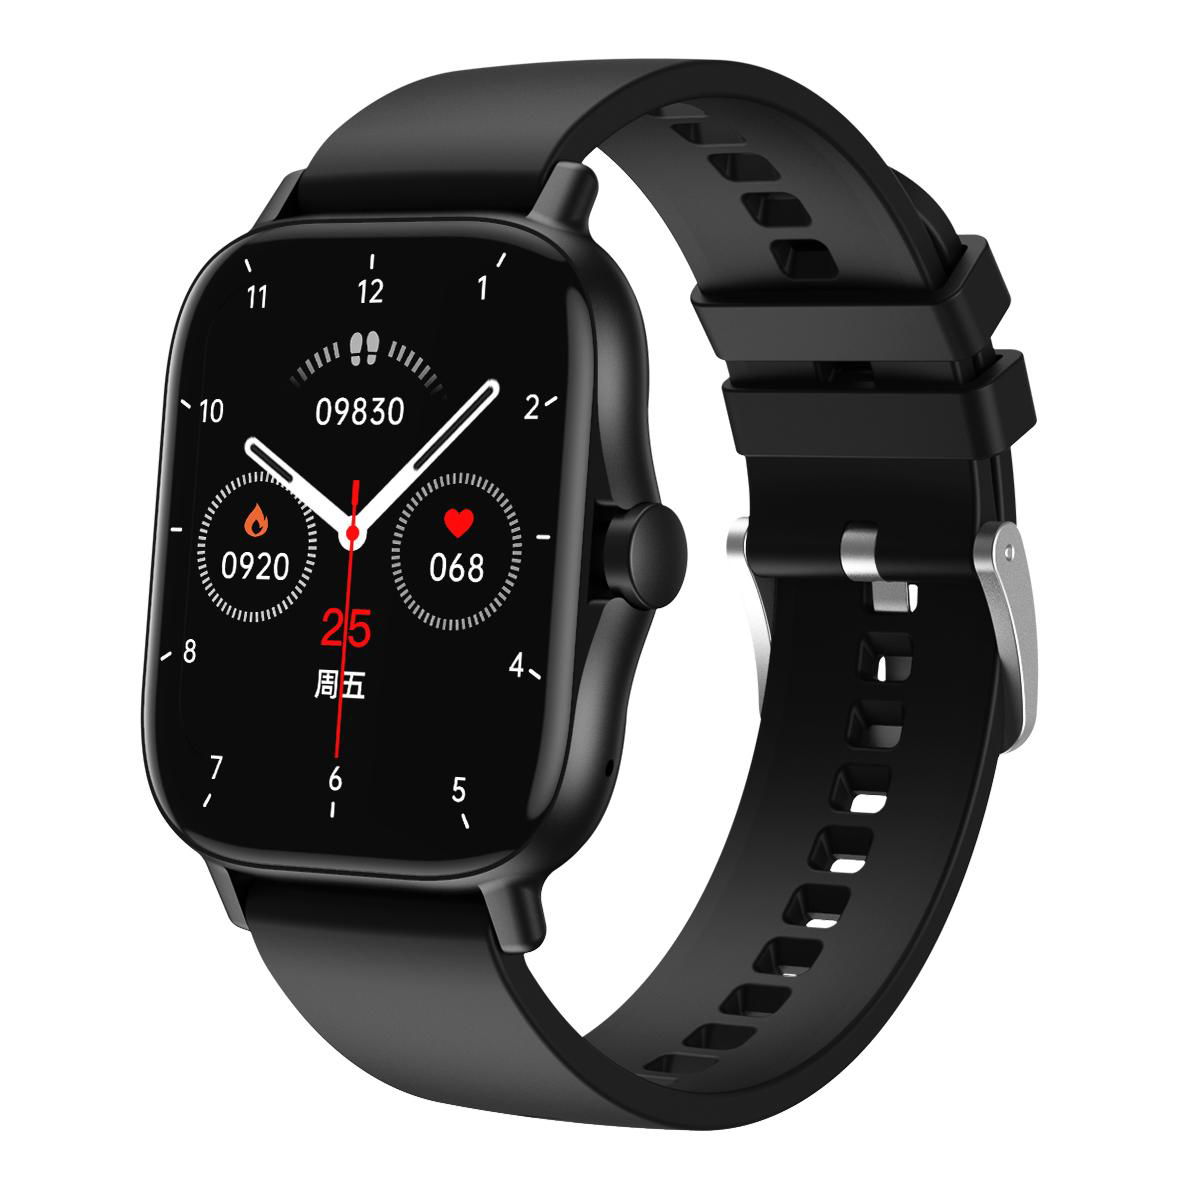 DW11 smart watch phone with touch display and bluetooth phone call 3